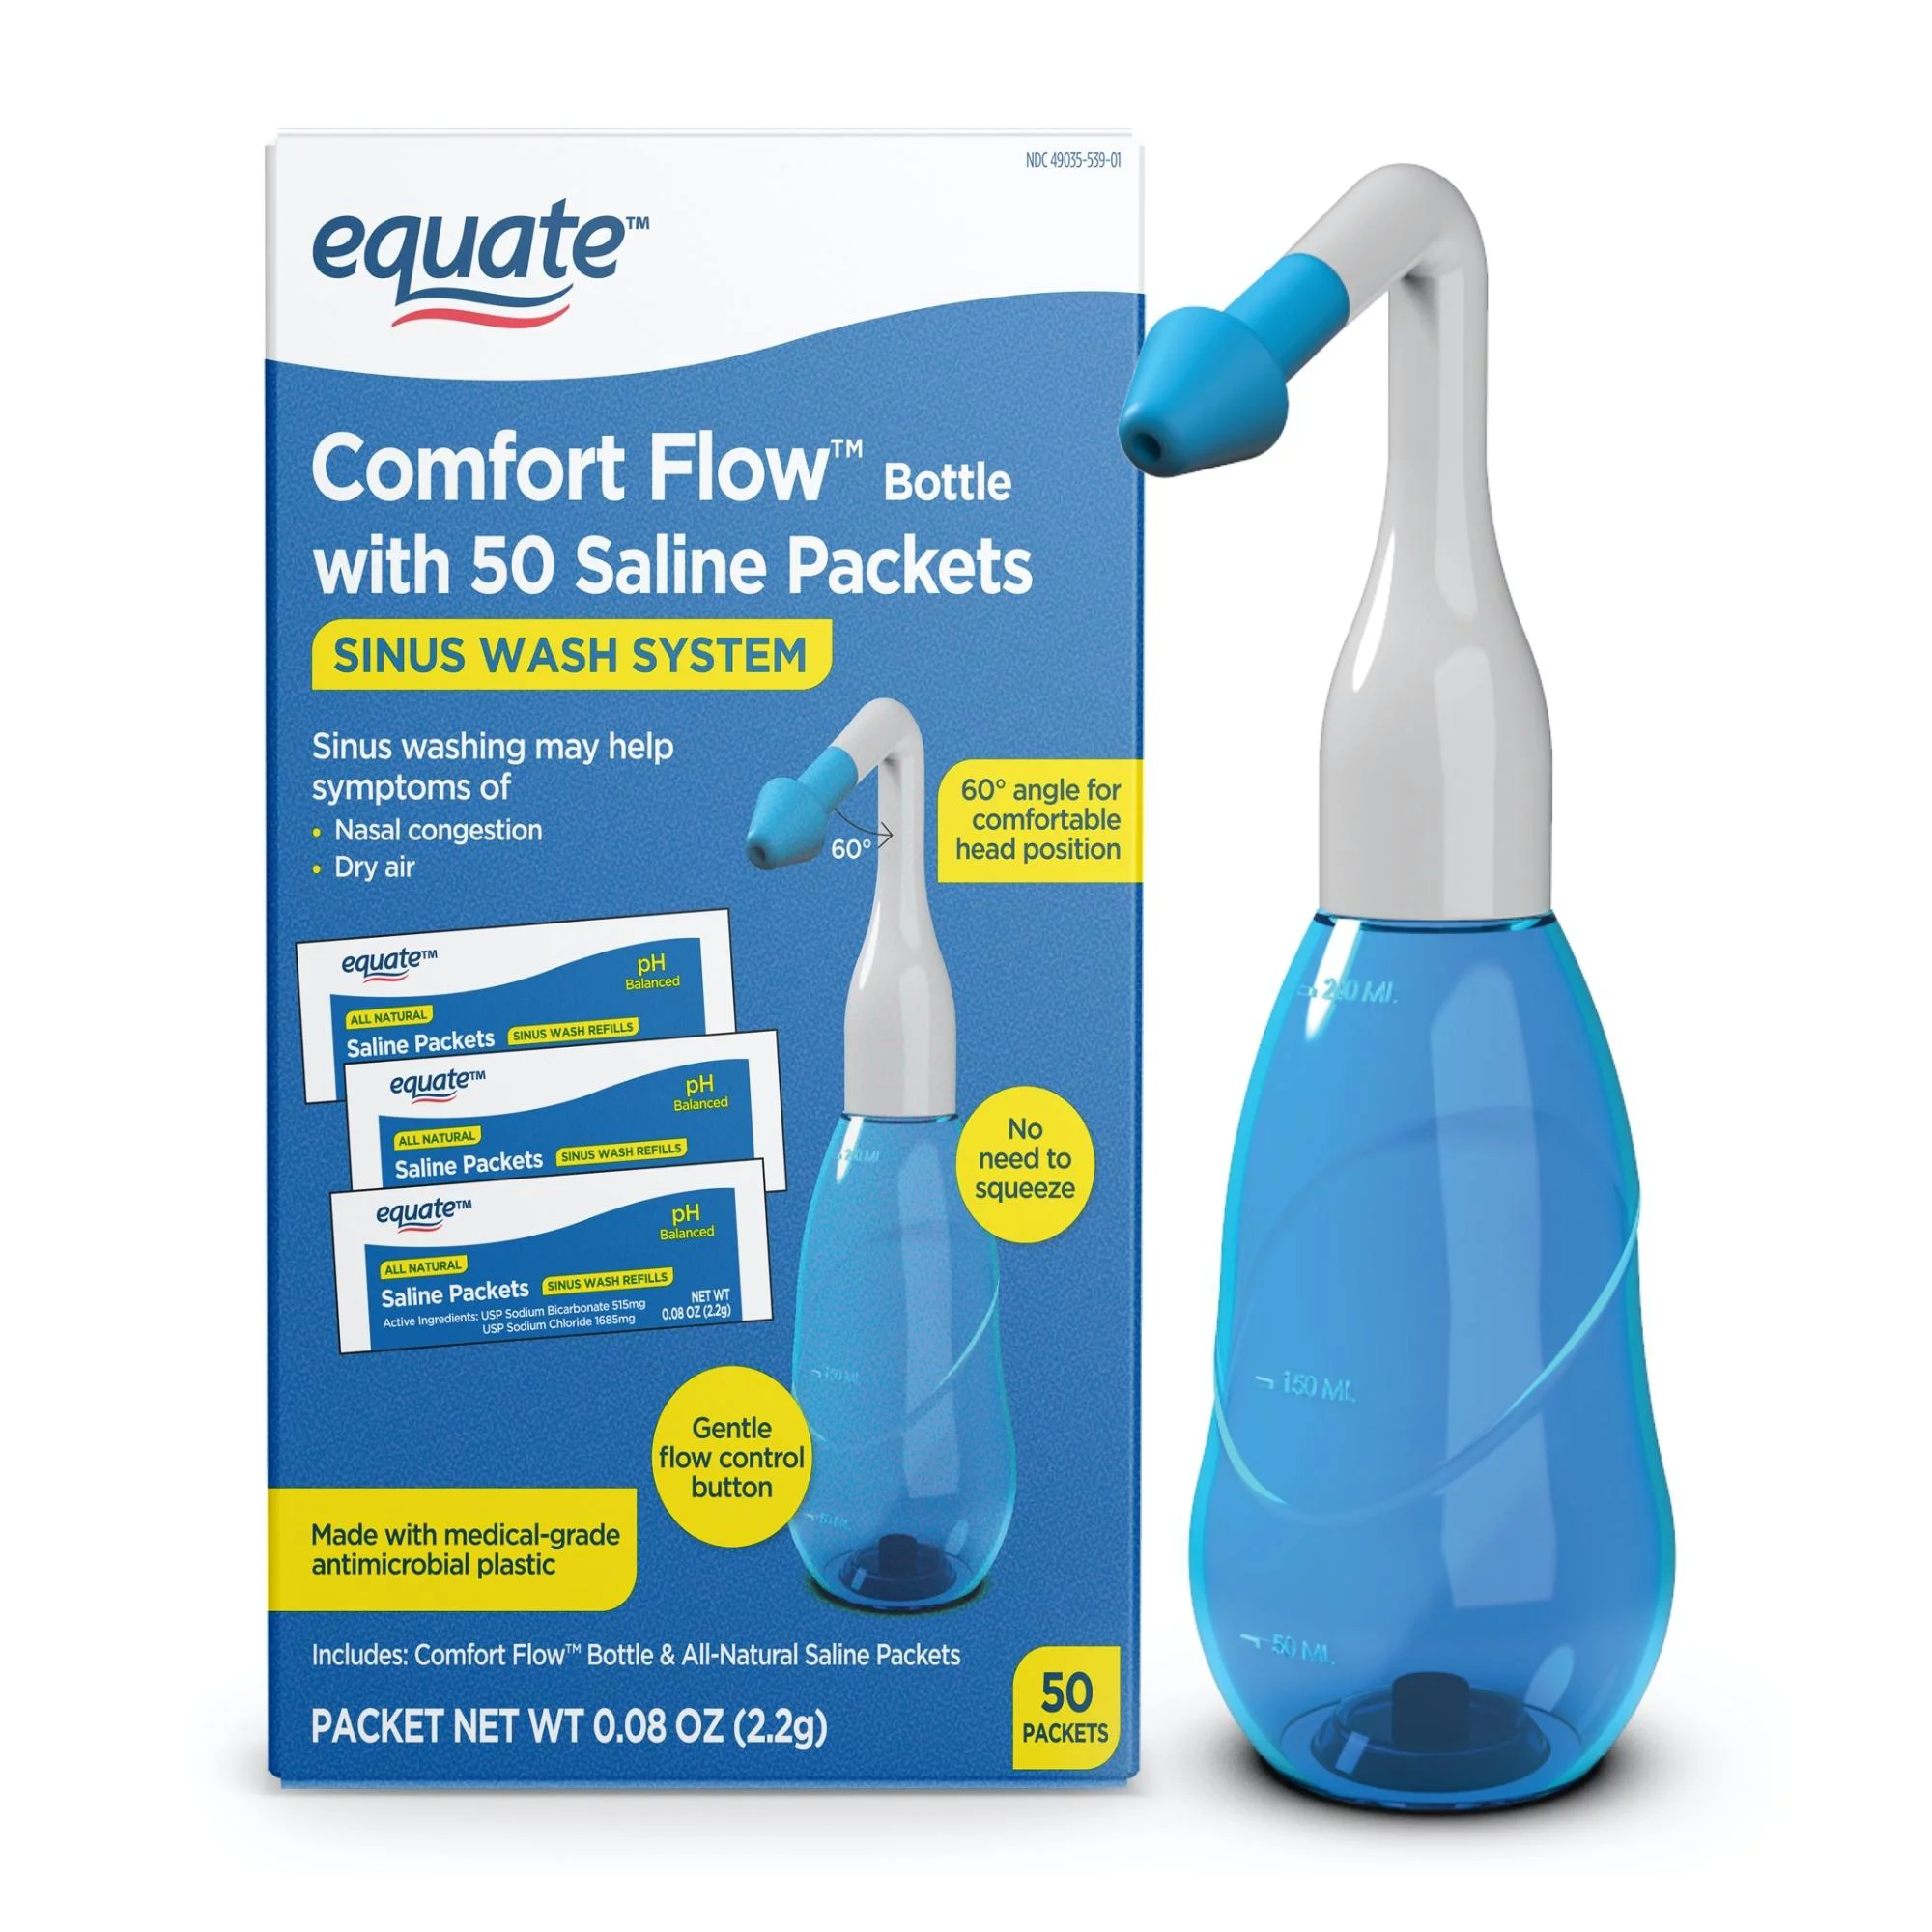 Equate Comfort Flow Bottle with 50 Saline Packets Nasal Wash System for Nasal Congestion - Blue